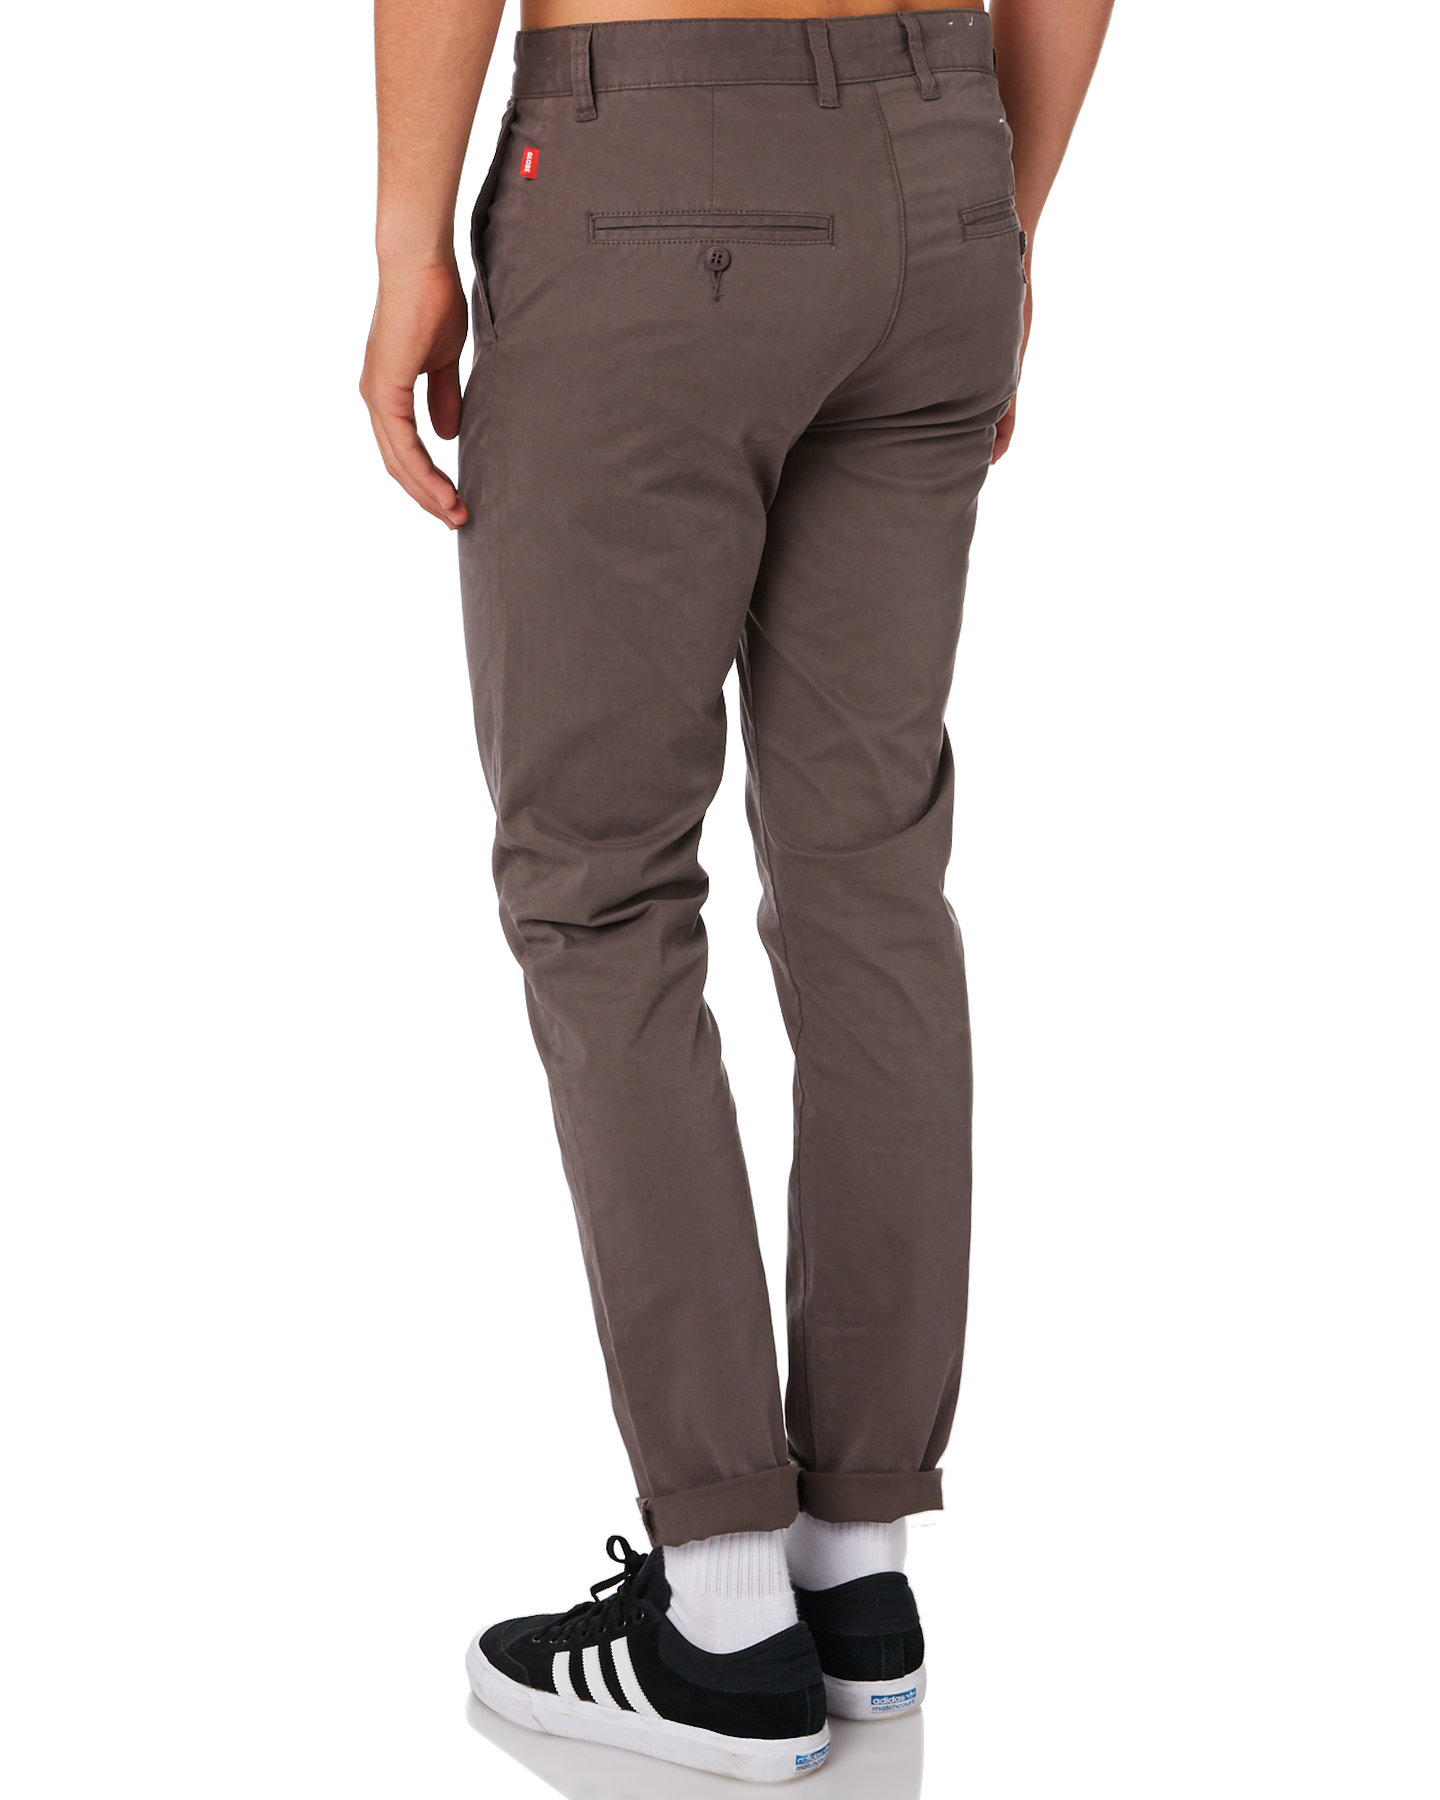 Different ones Styles of Mens Pants – Telegraph